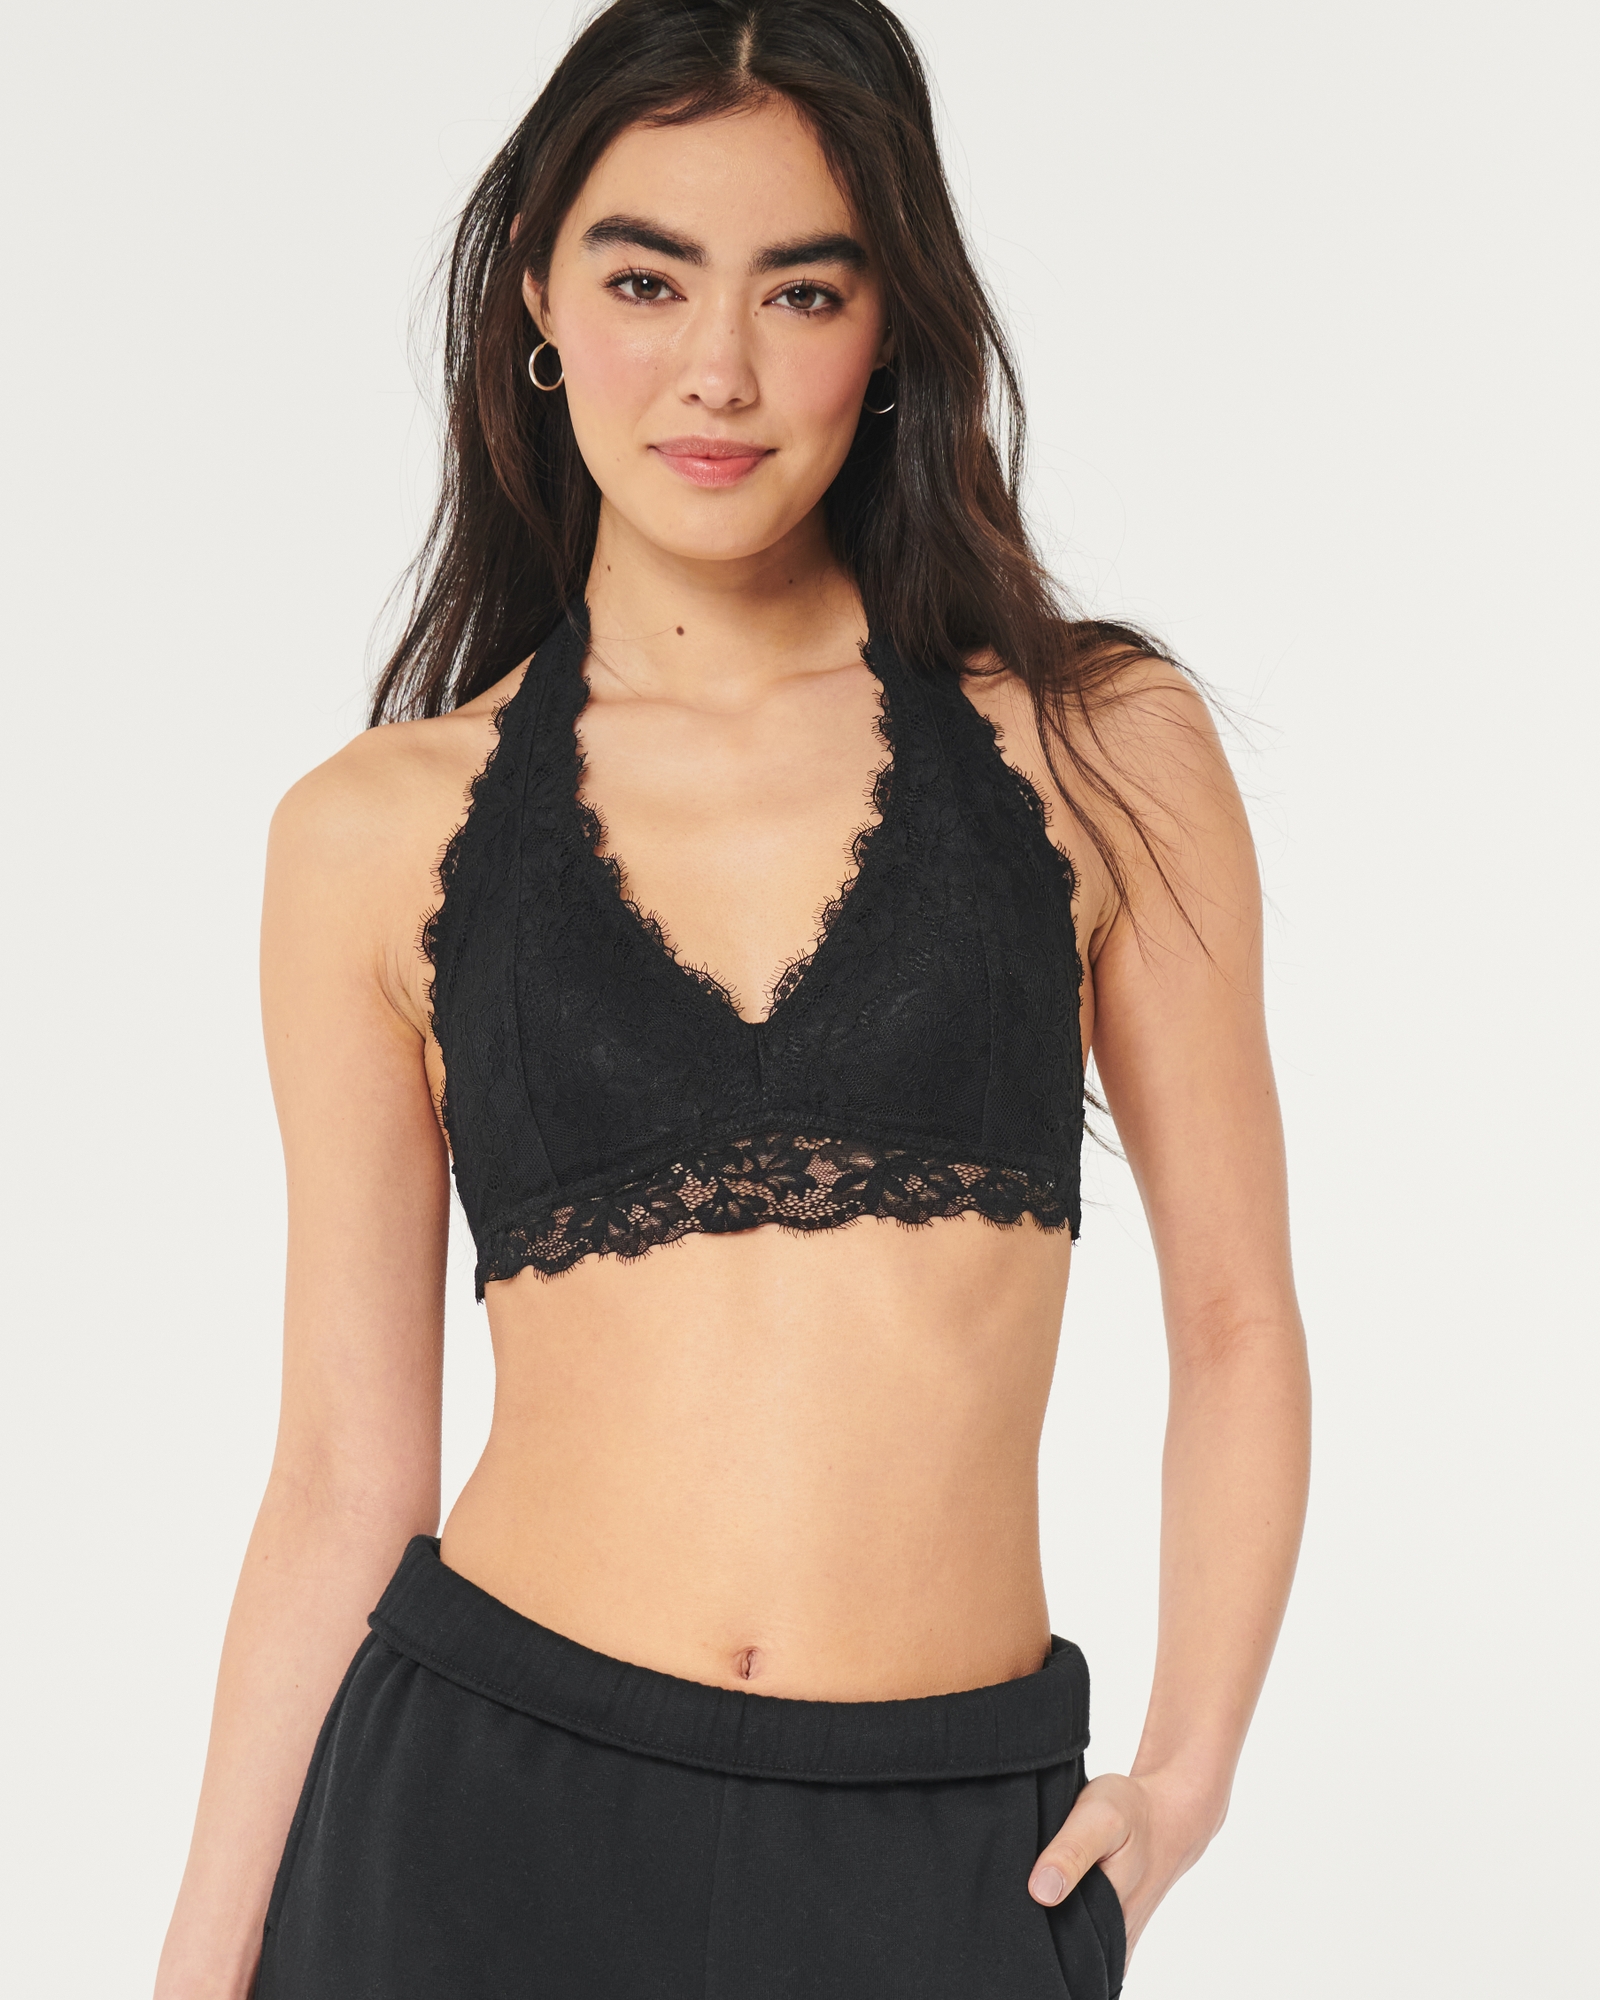 Lace Halter Bralette With Removable Pads from Hollister on 21 Buttons